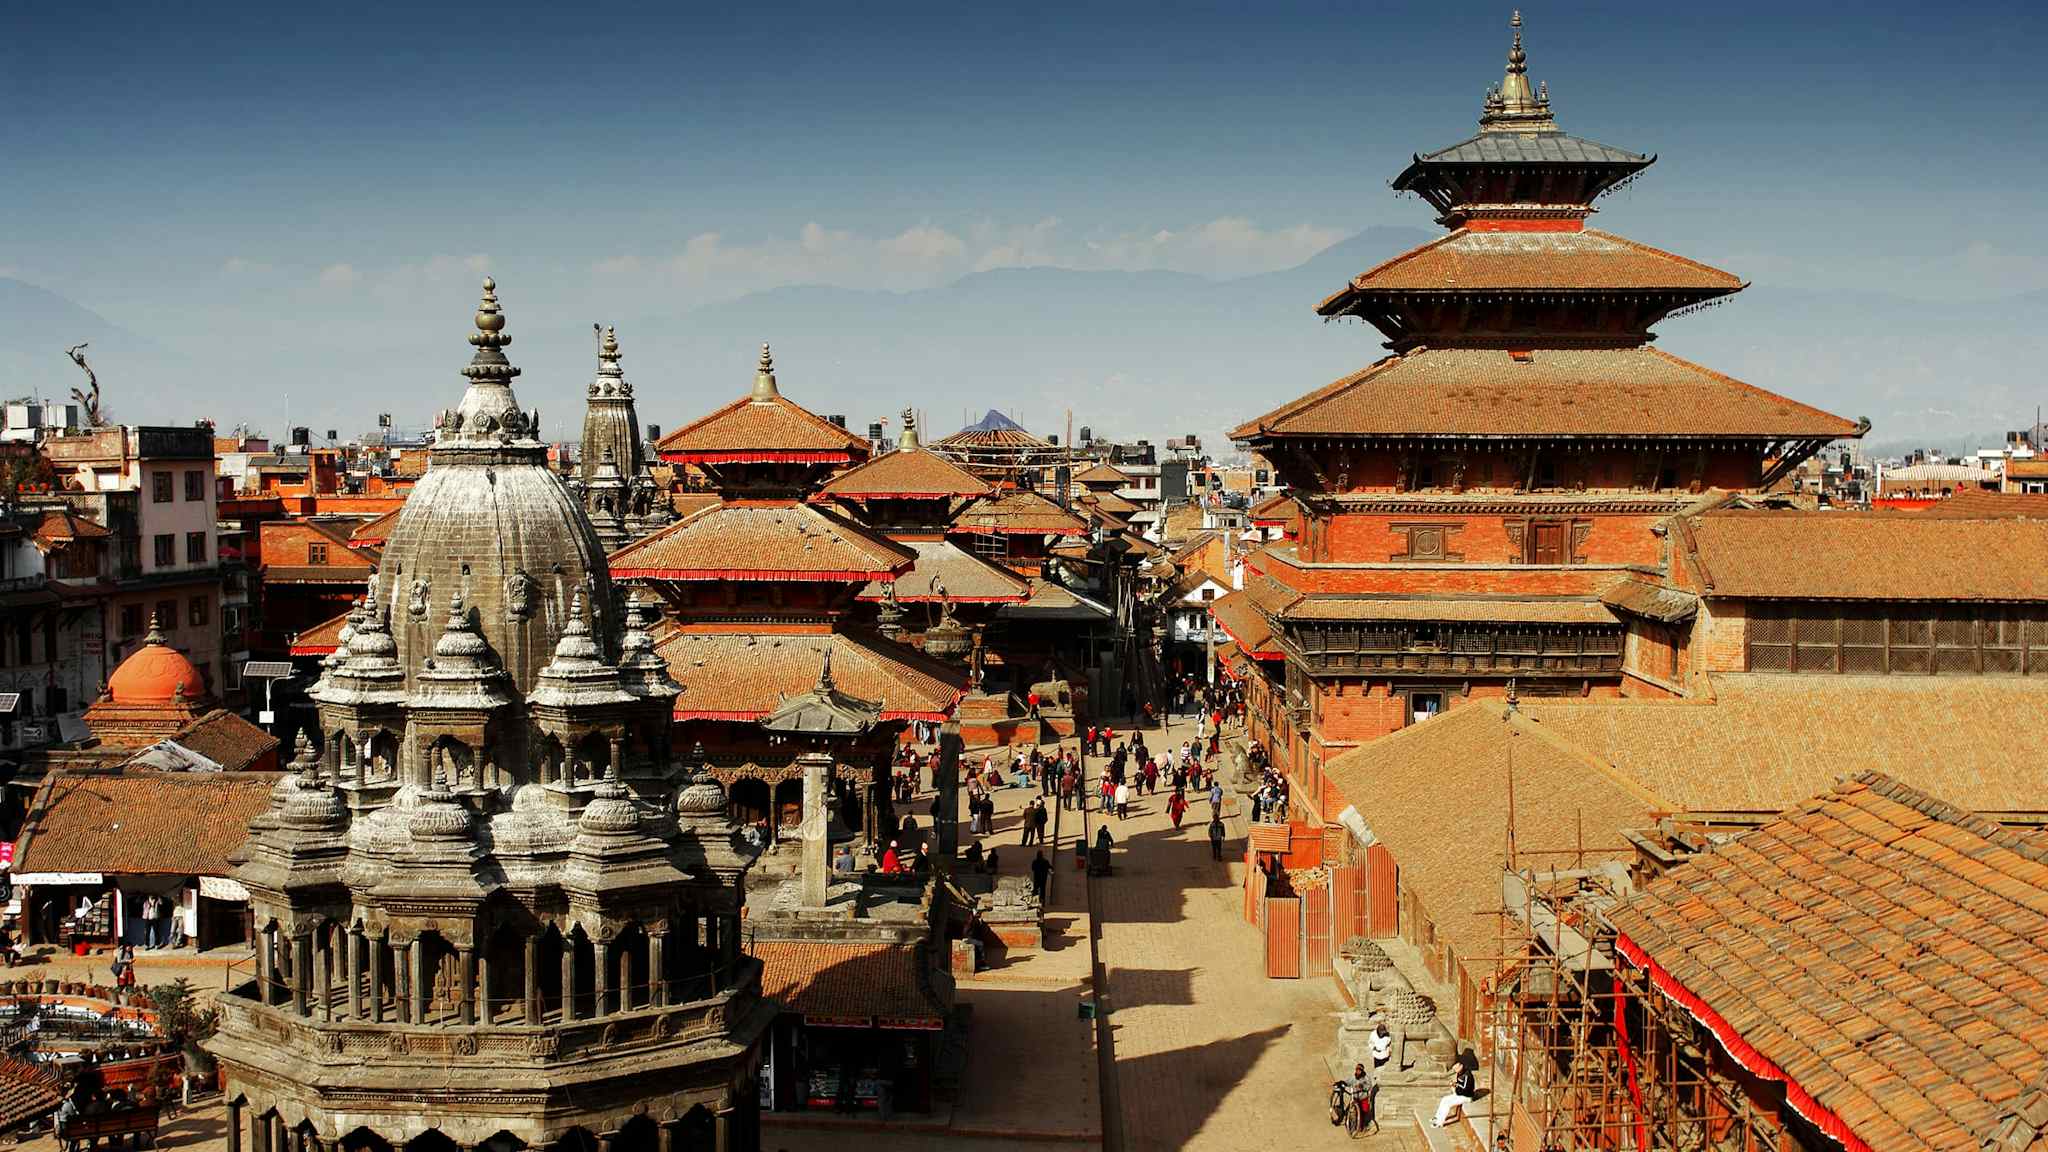 View across the rooftops of temples in Kathmandu, Nepal. 